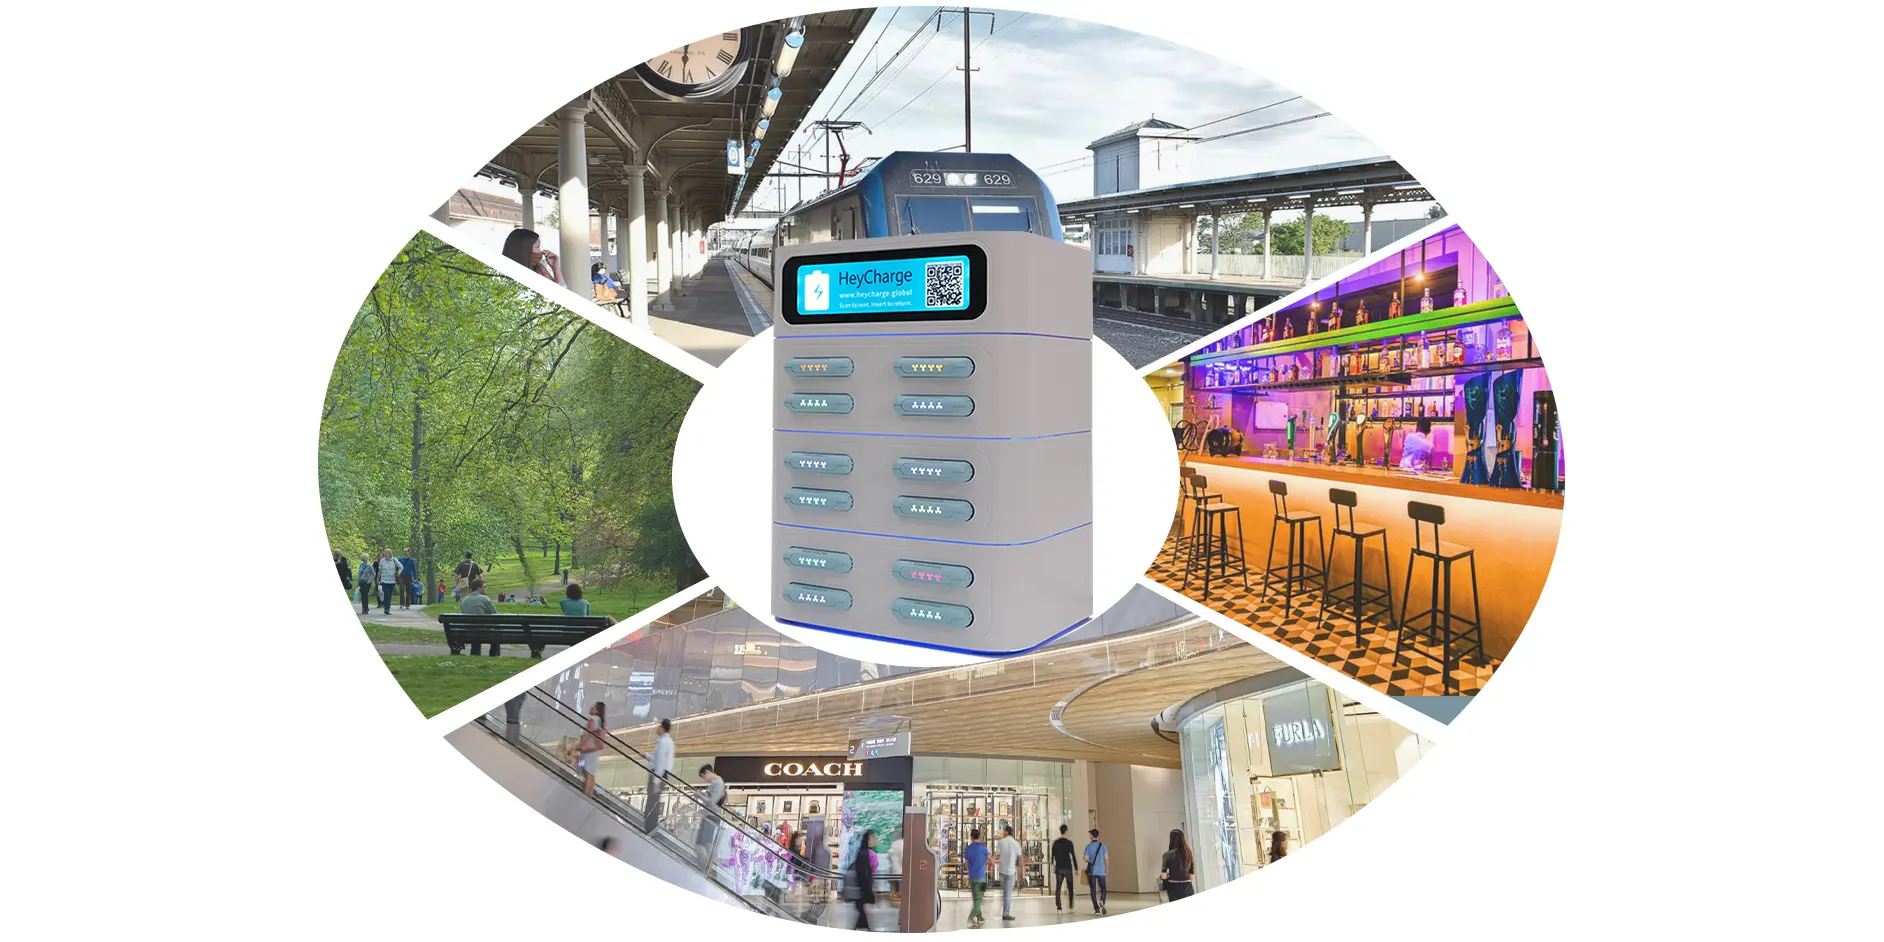 rental power bank stations at different venues